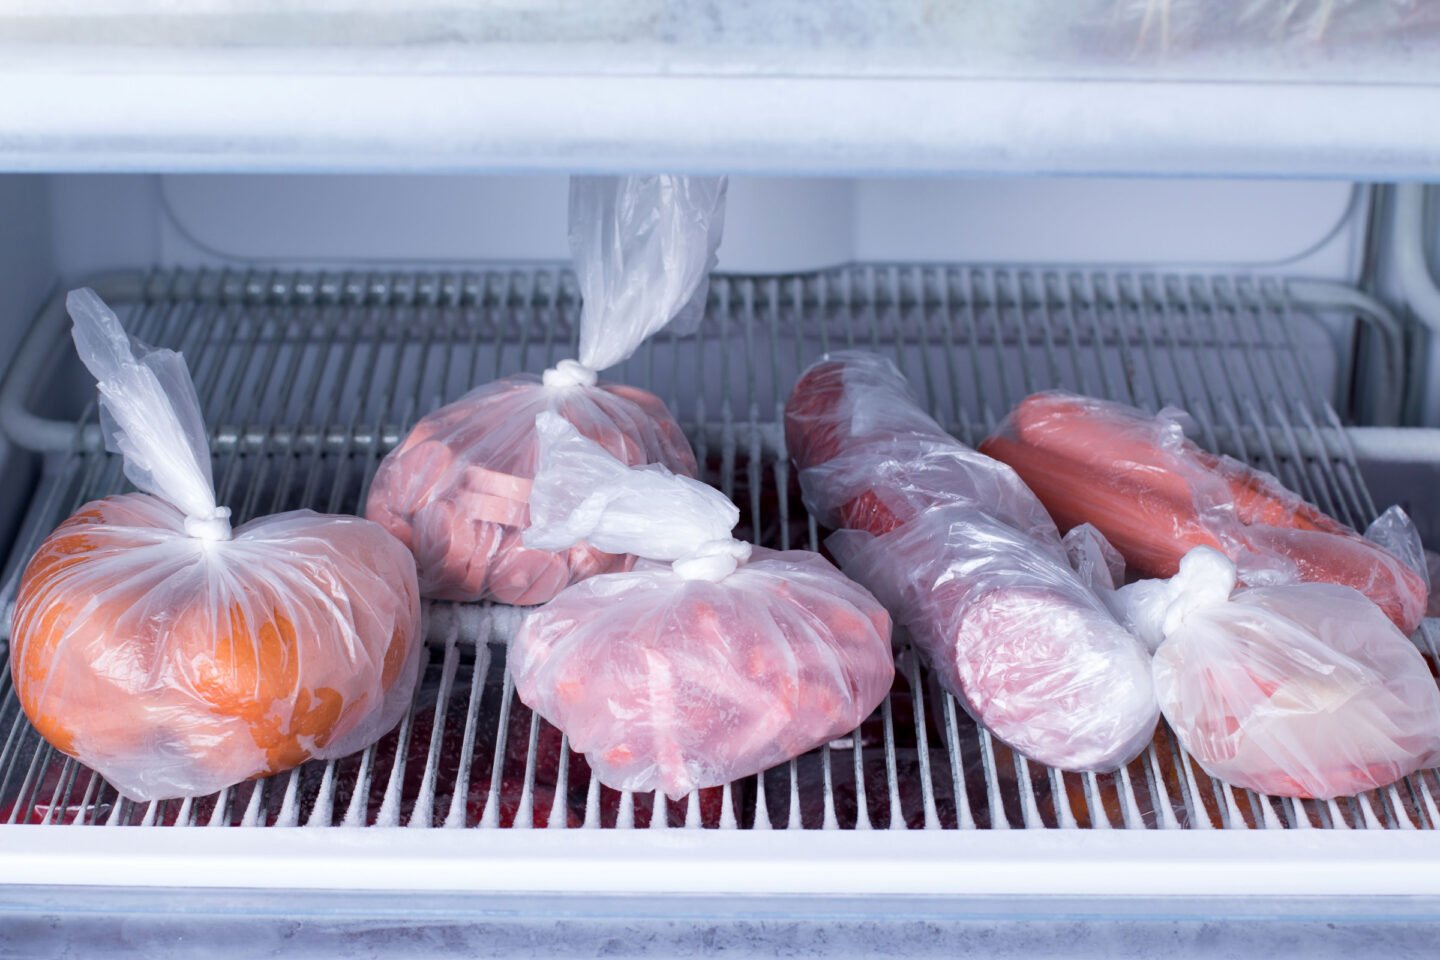 storing sausages in plastic bags inside the fridge